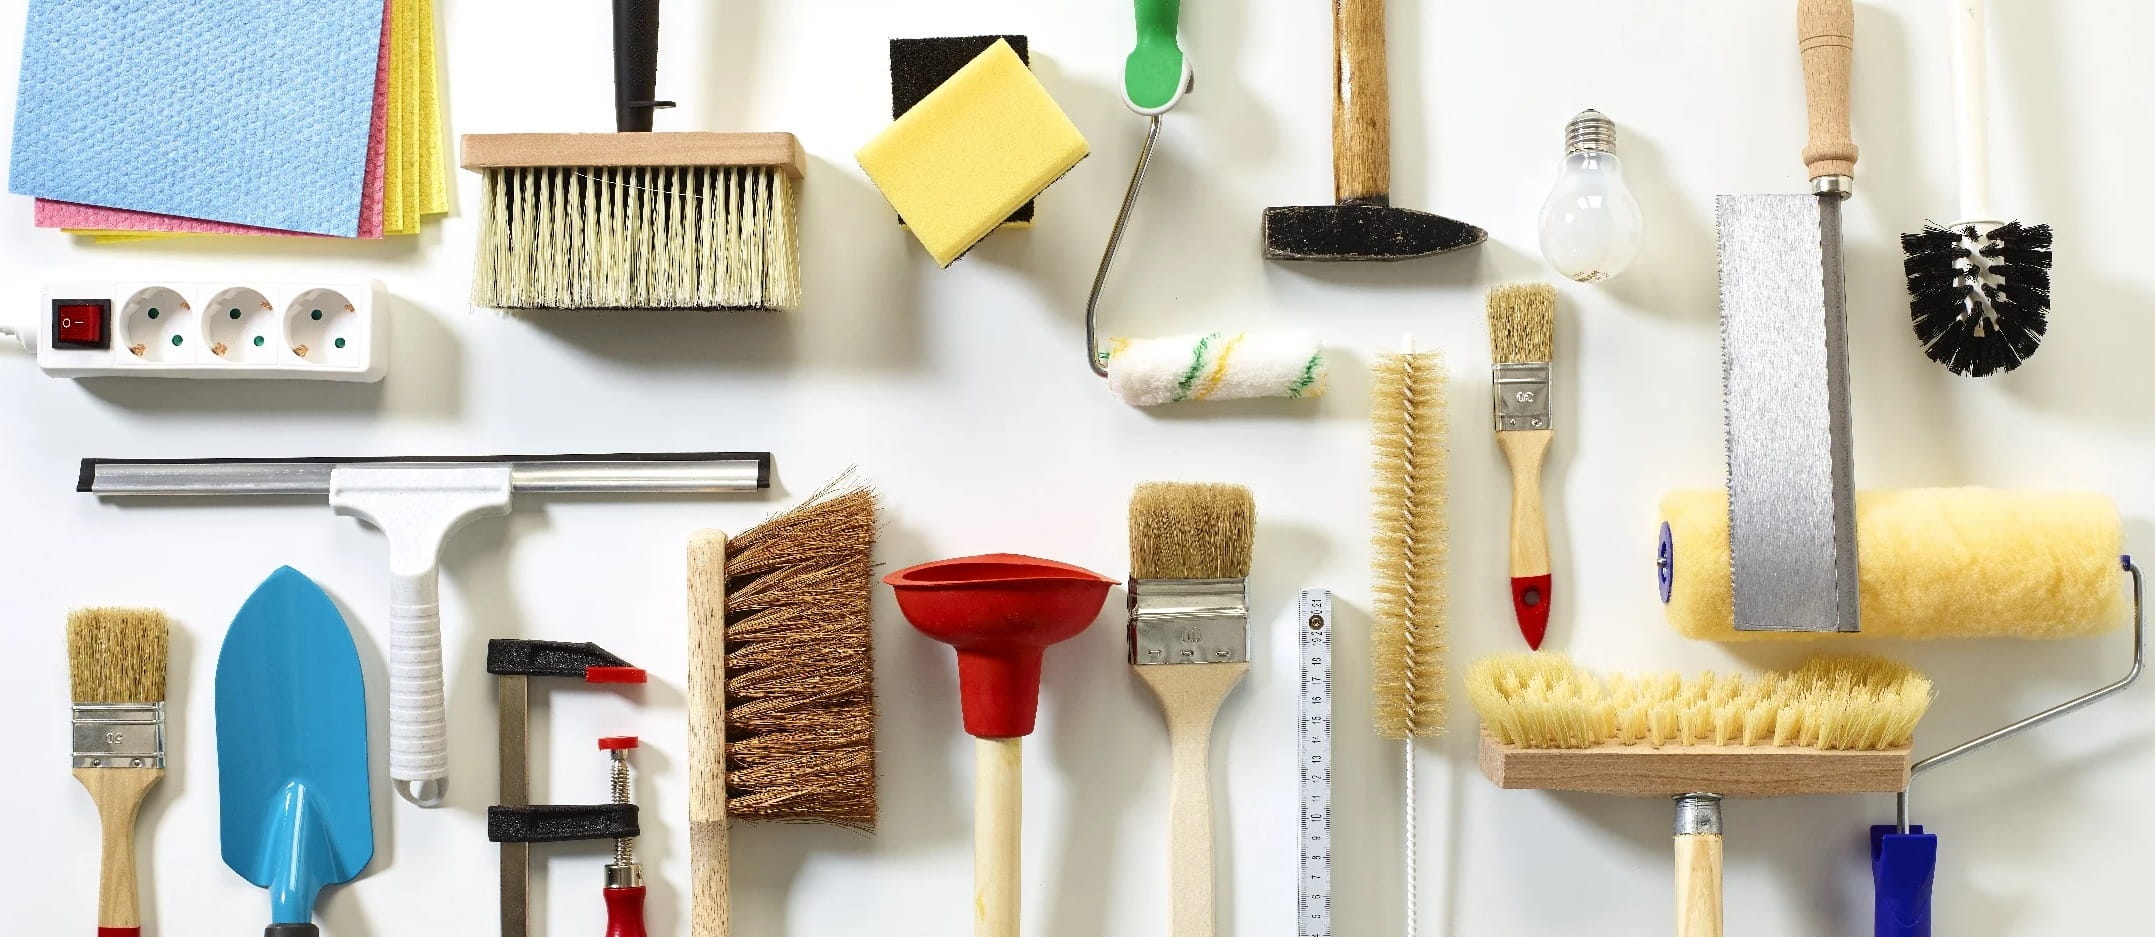 What Are Major Home Repair Items?